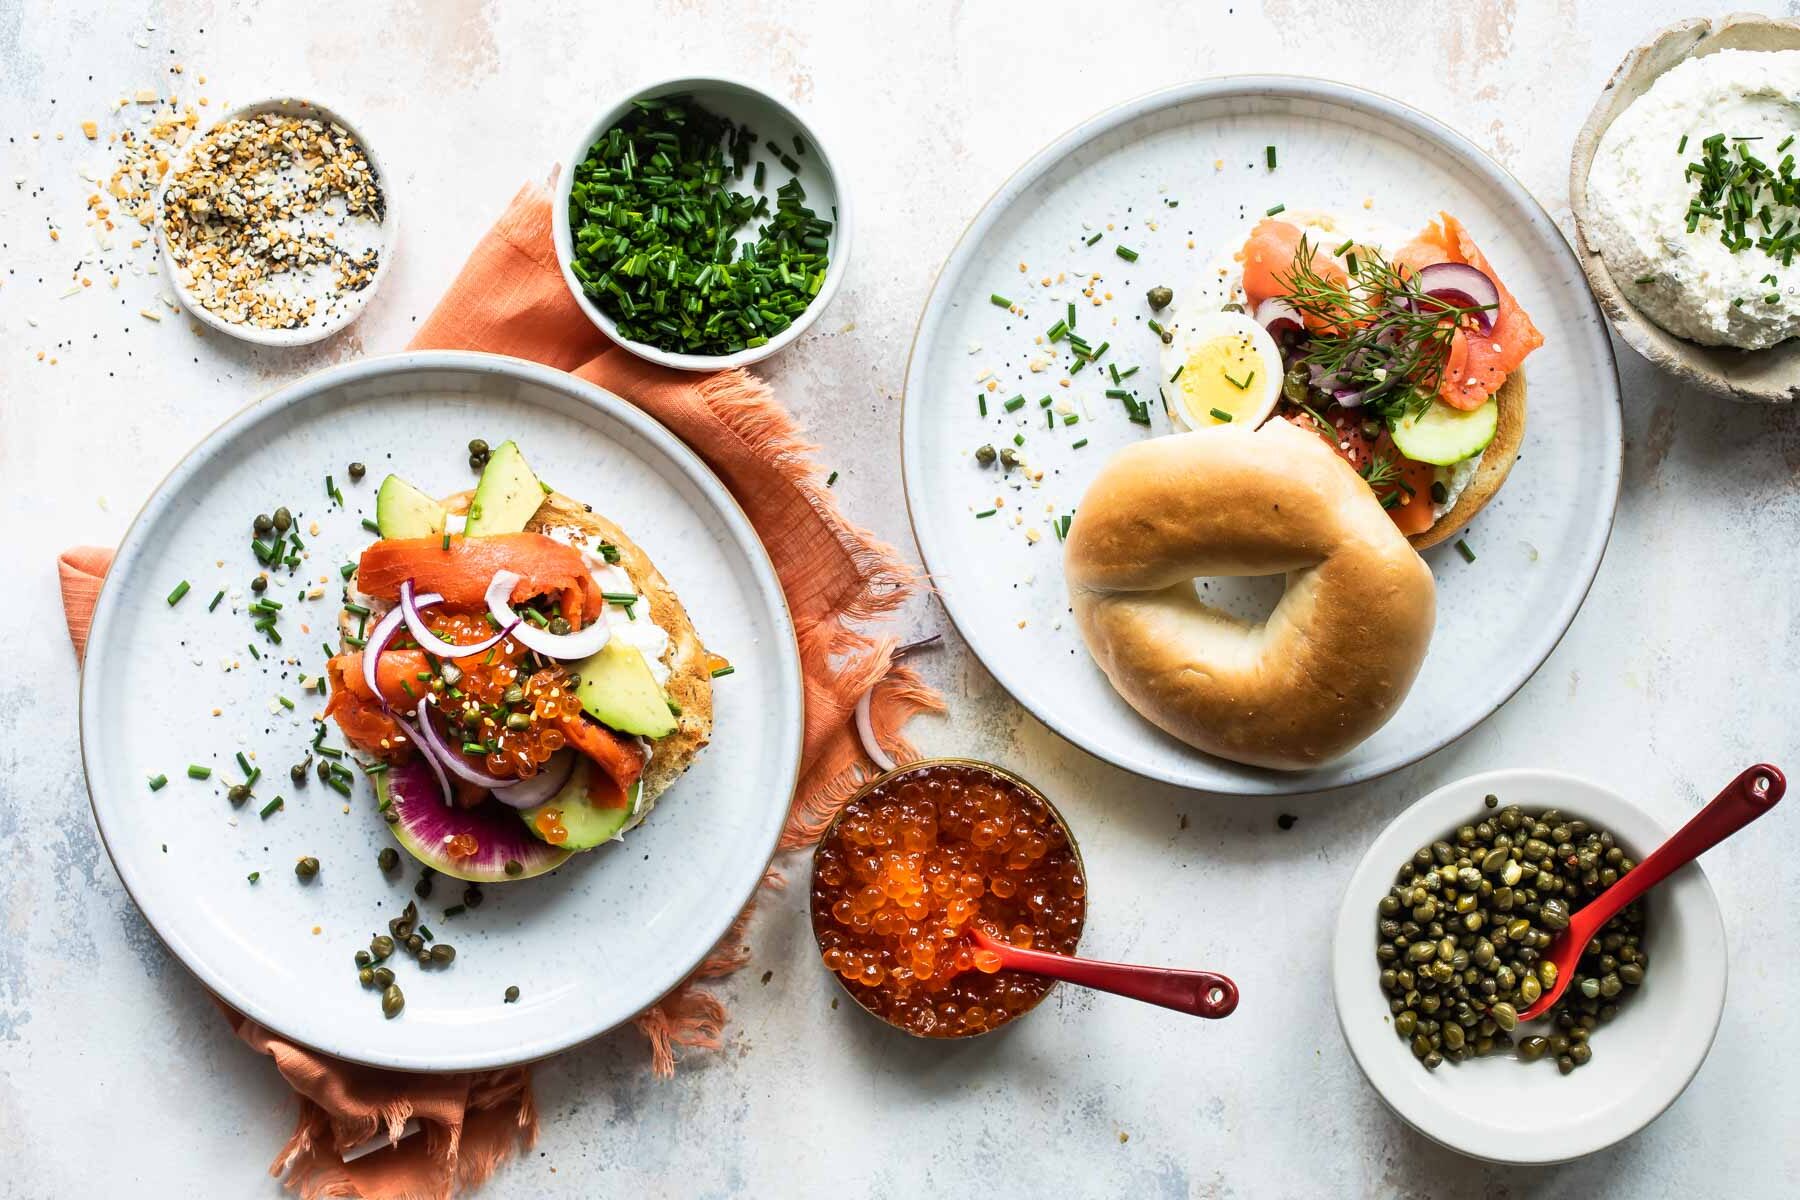 A bagel topped with smoked salmon, salmon roe, avocado, caviar, herbs, and vegetables.